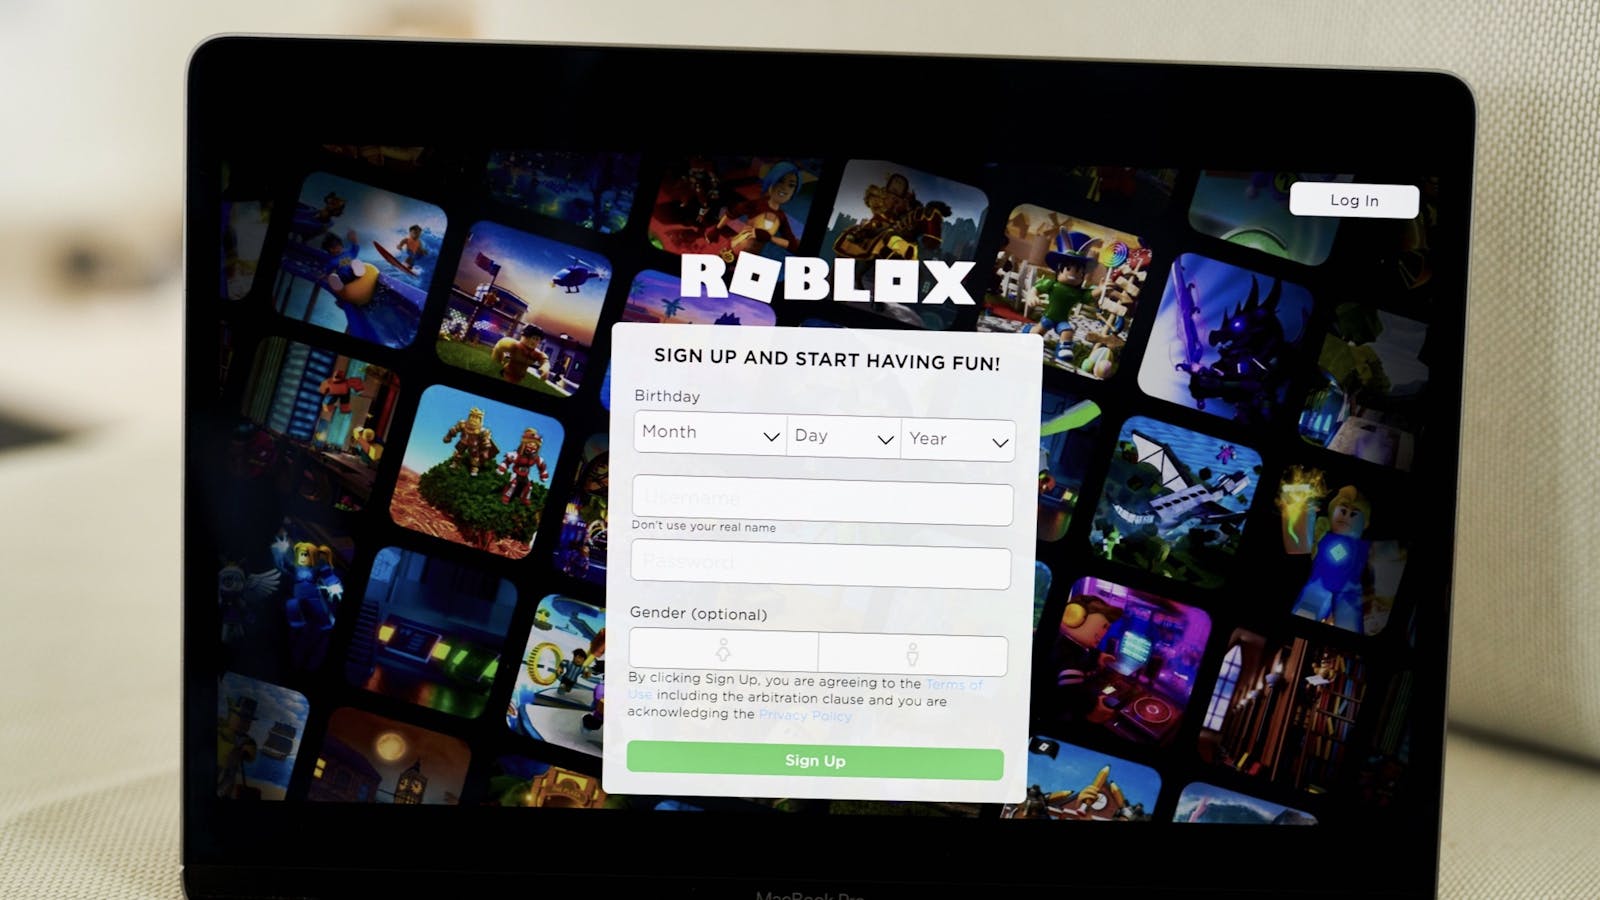 Roblox's web site. Photo by Bloomberg